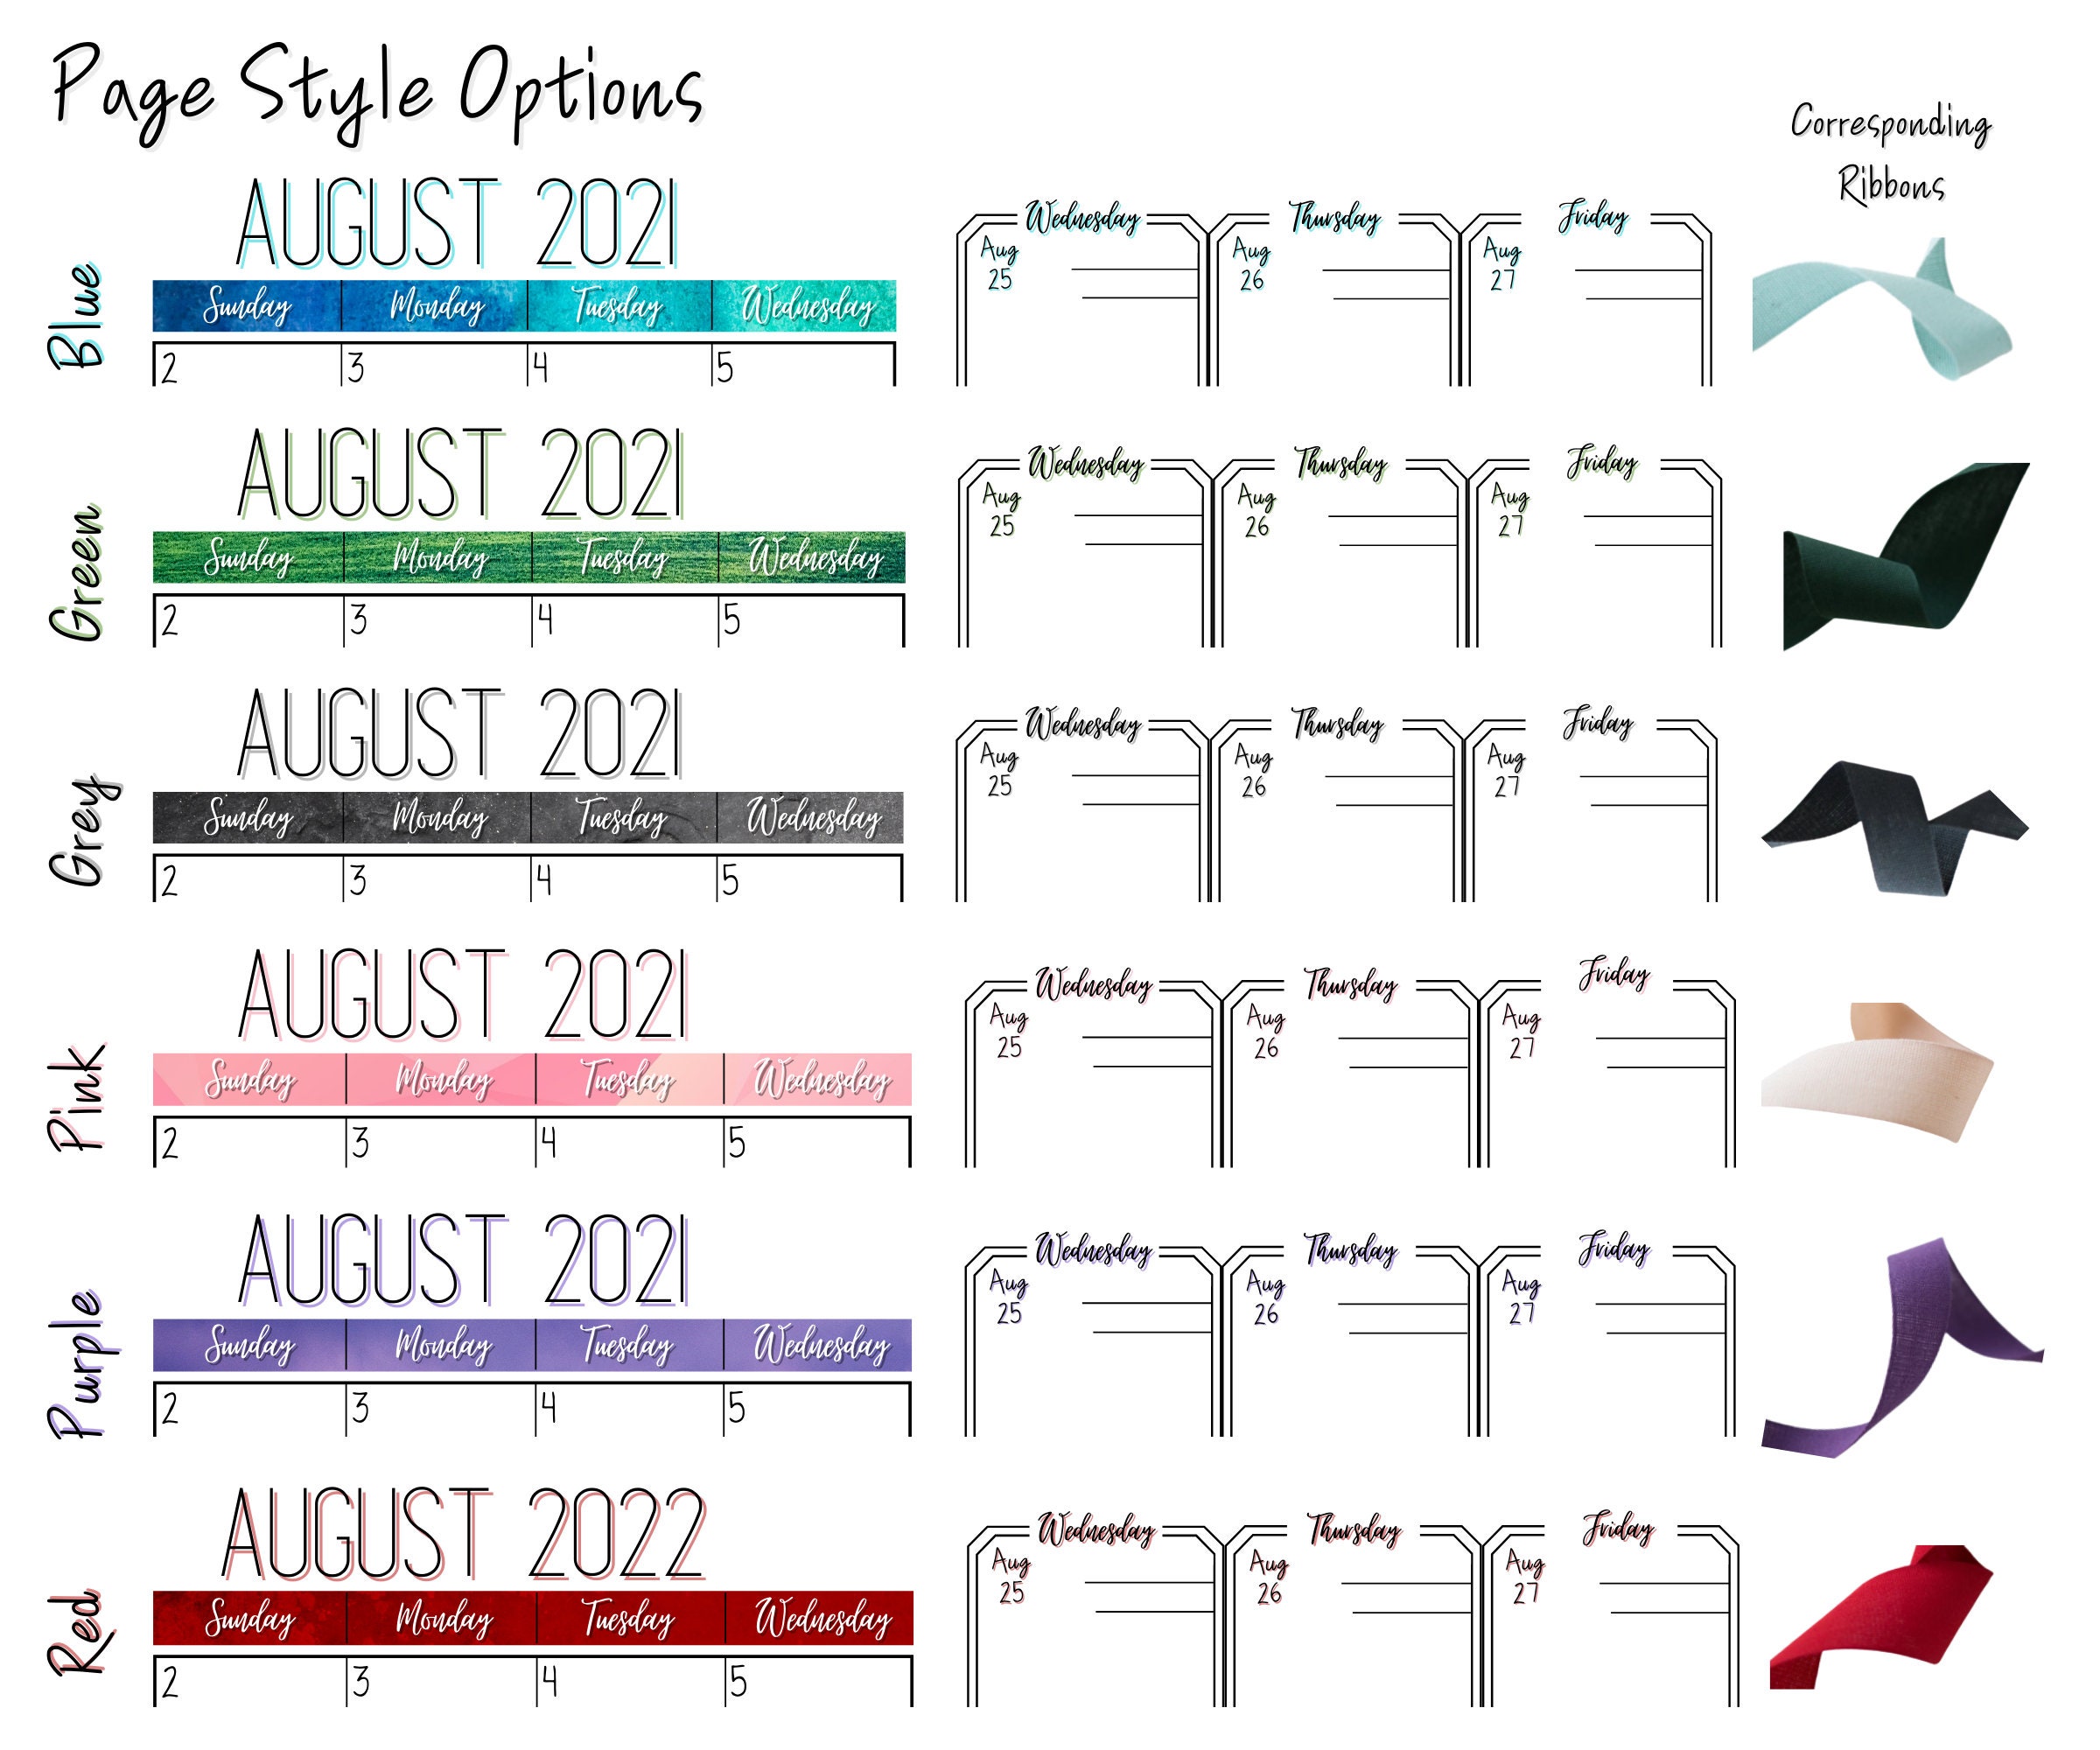 6 colors options are shown. Blue, Green, Grey, Pink, Purple, and Red. The colors for the days of the week for months is shown as well as the header on the main pages which have a shadow of a matching color. On the right is a column called corresponding ribbons that show the color of each ribbon that is attached as a bookmark, the color matches but the shade varies.